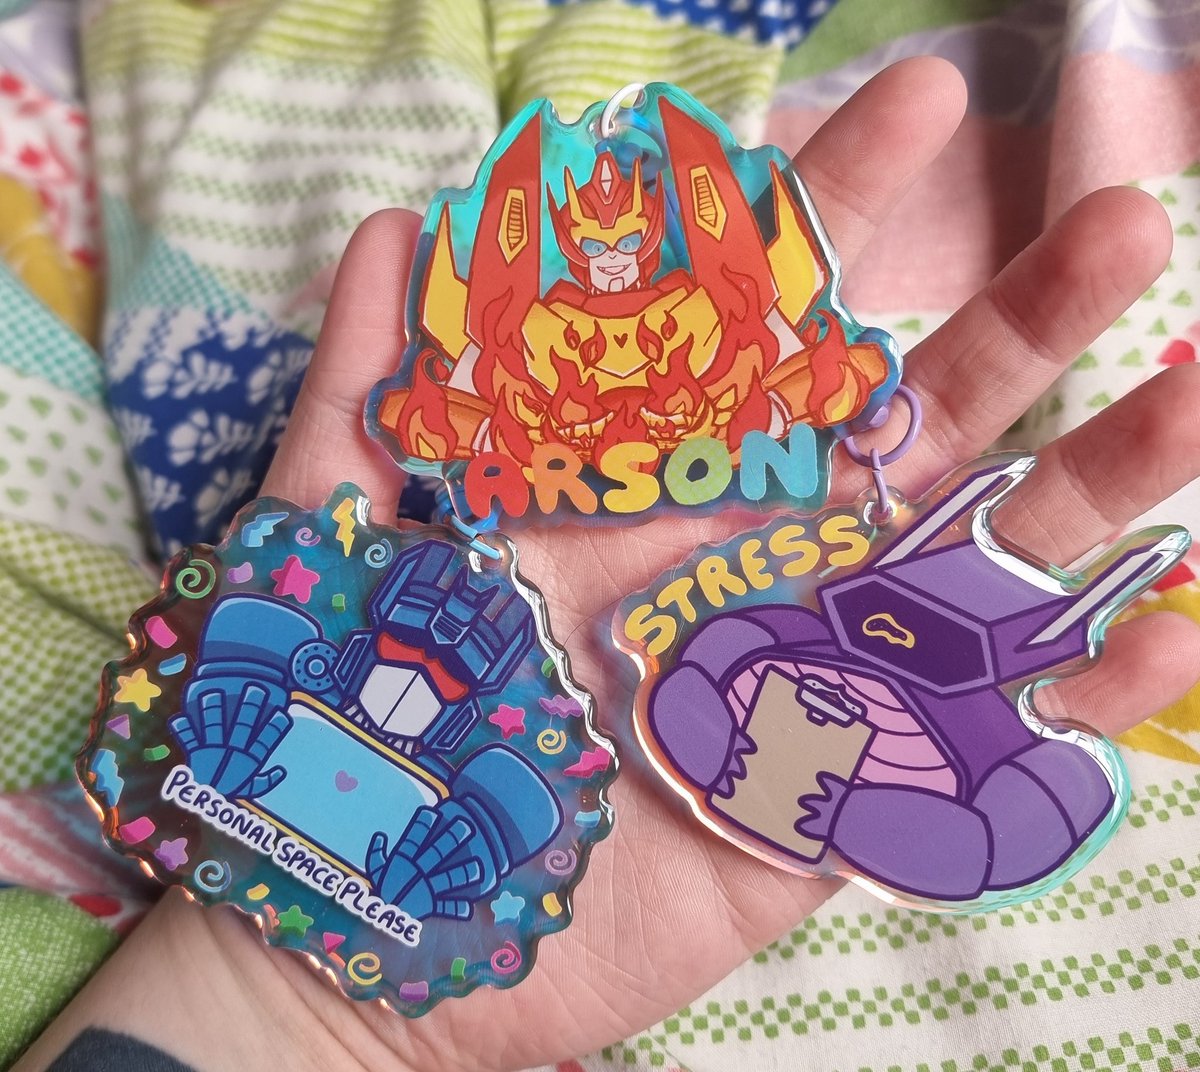 MY NEW STORE IS OFFICIALLY OPEN! :D I have leftovers from the TFN Mini-Con and some new bits that have recently arrived! Please come check it out! All the orders come with freebies as usual and I have TF Mystery Bags! I also have power rangers! kanashikaizer.com